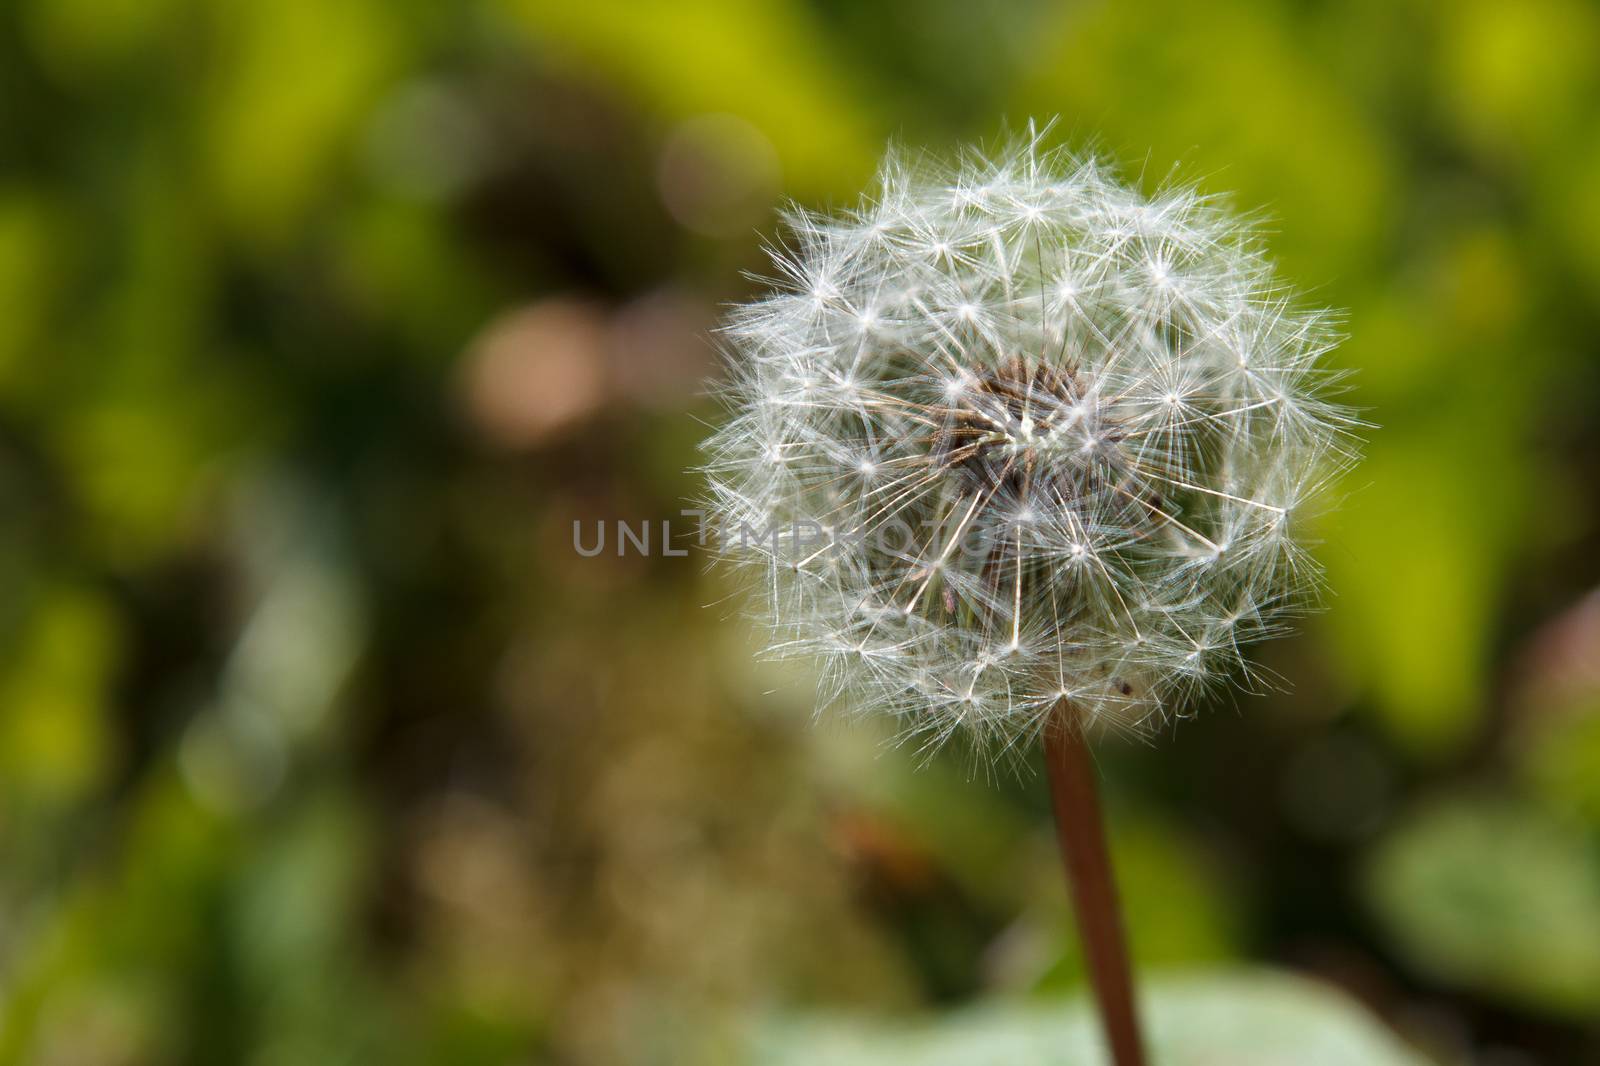 A old dandelion with seeds yet to be blown away